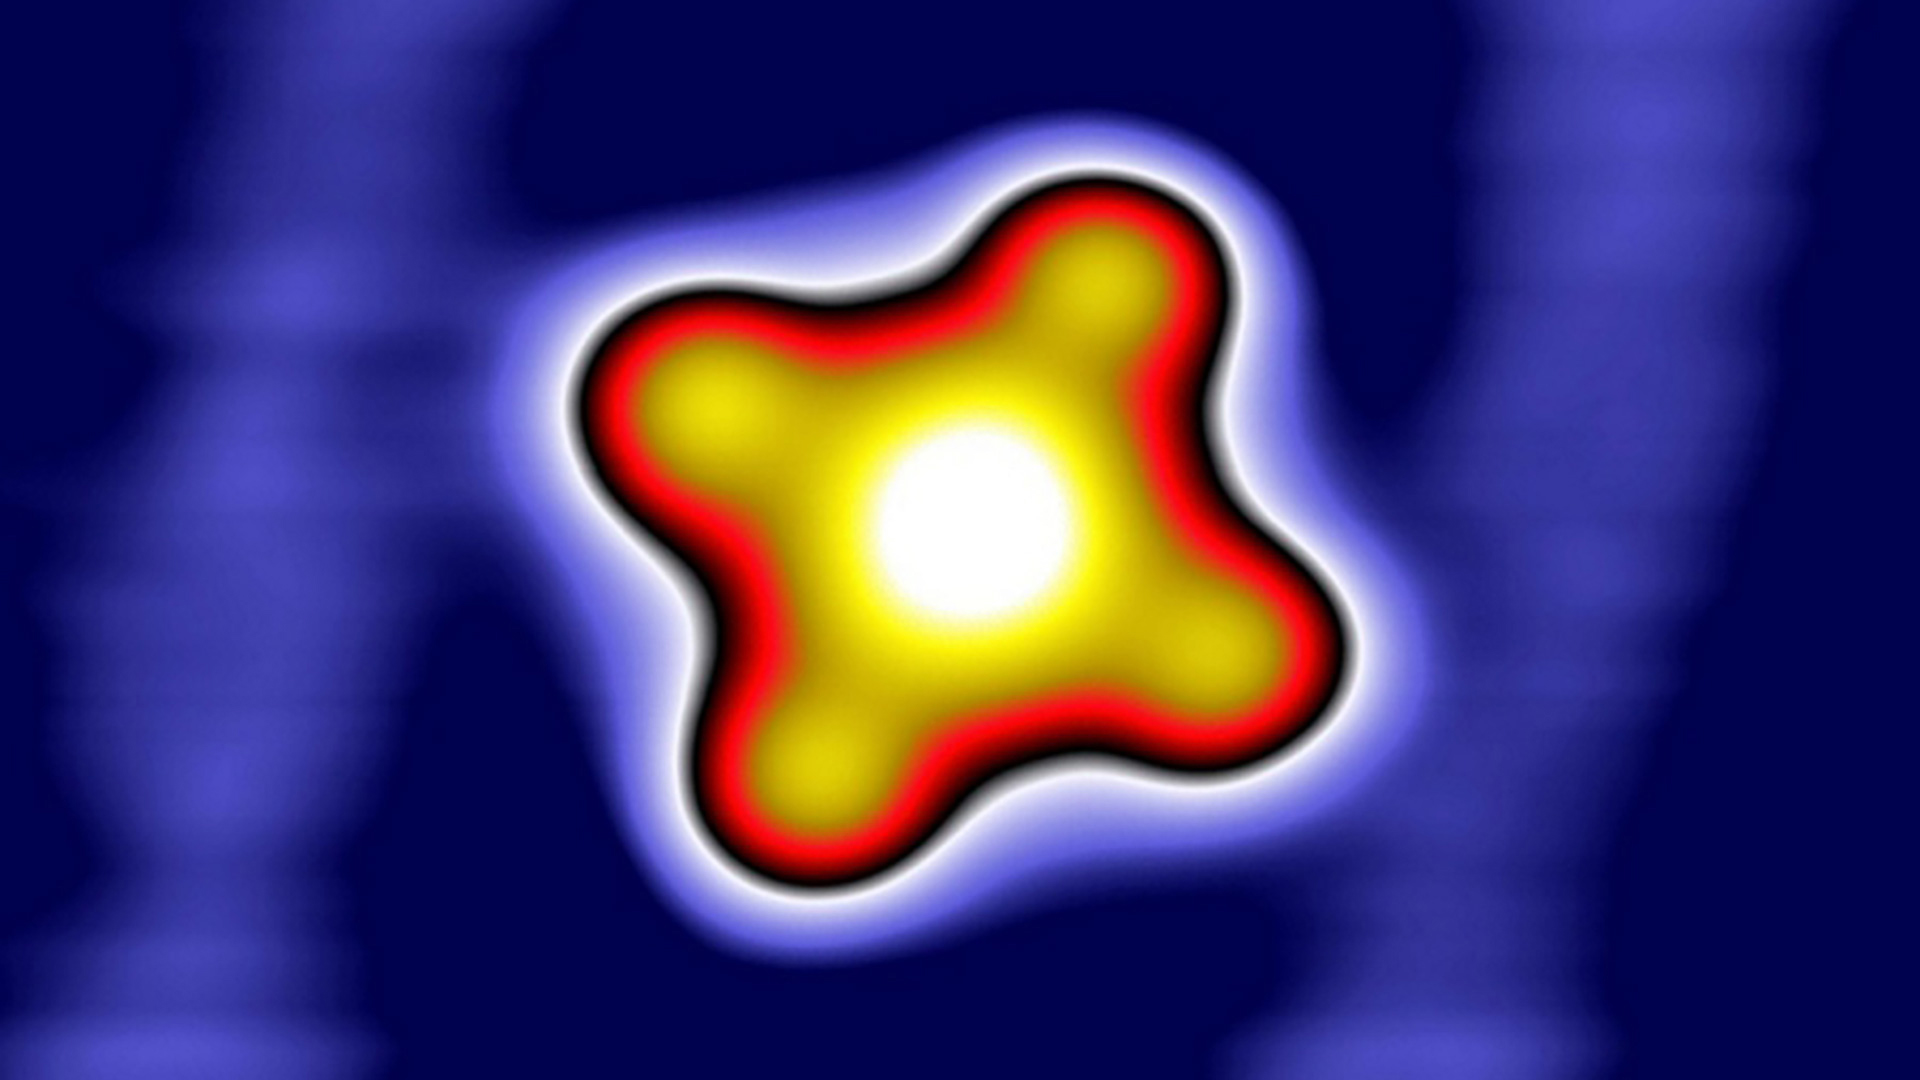 Glowing white to yellow to red to violet, rounded four-pronged shape on deep indigo background.